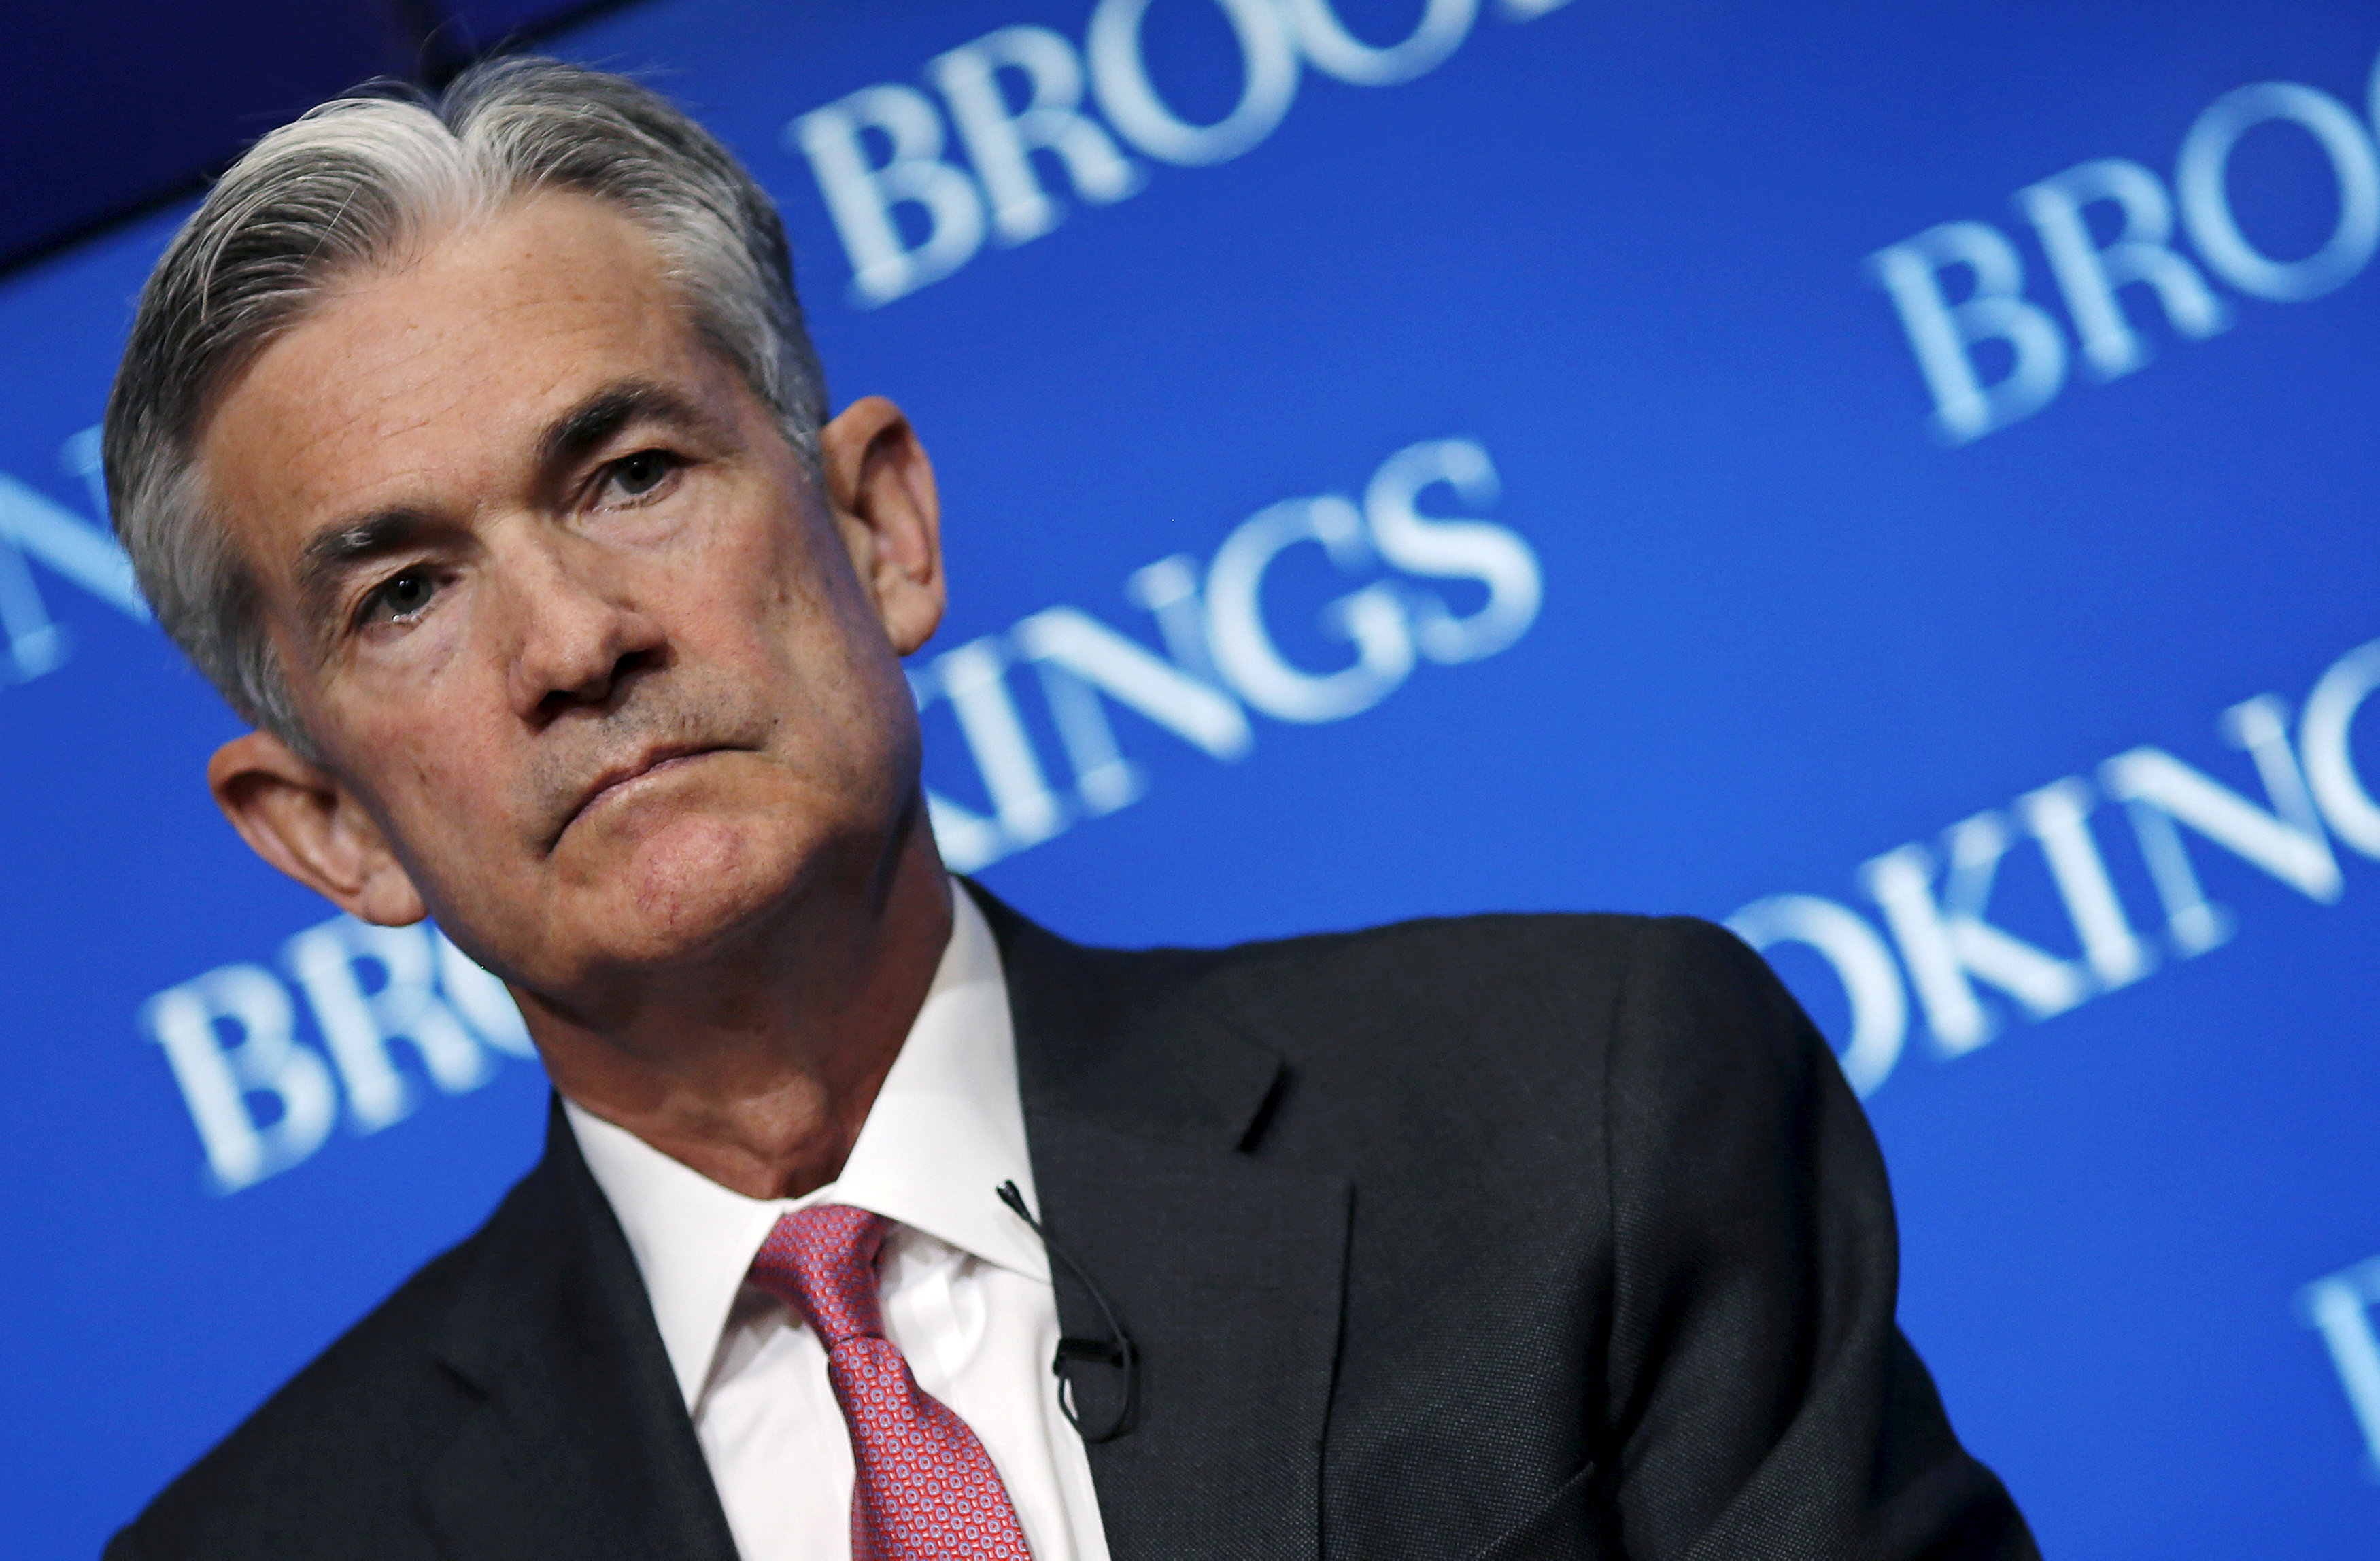 US markets fret over Fed's approach under new chair Powell